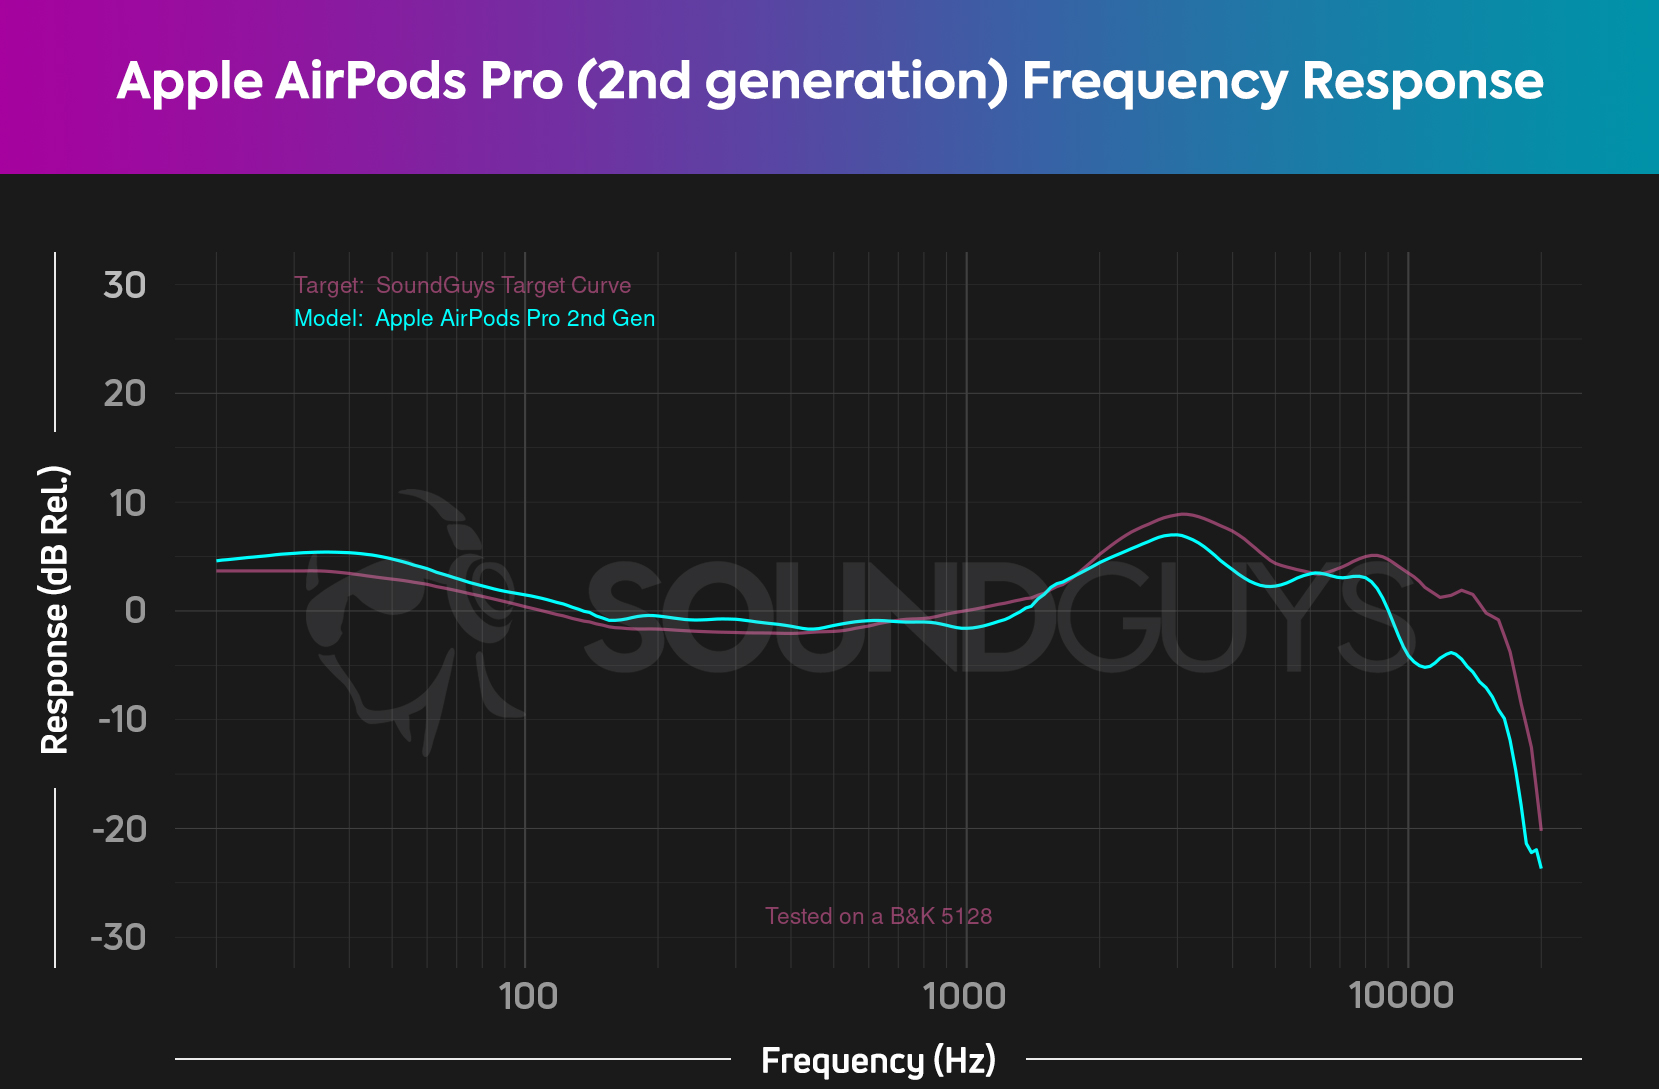 A chart depicts the Apple AirPods Pro (2nd generation) and AirPods Pro (1st generation) frequency responses, revealing the newer pair has a louder bass response.